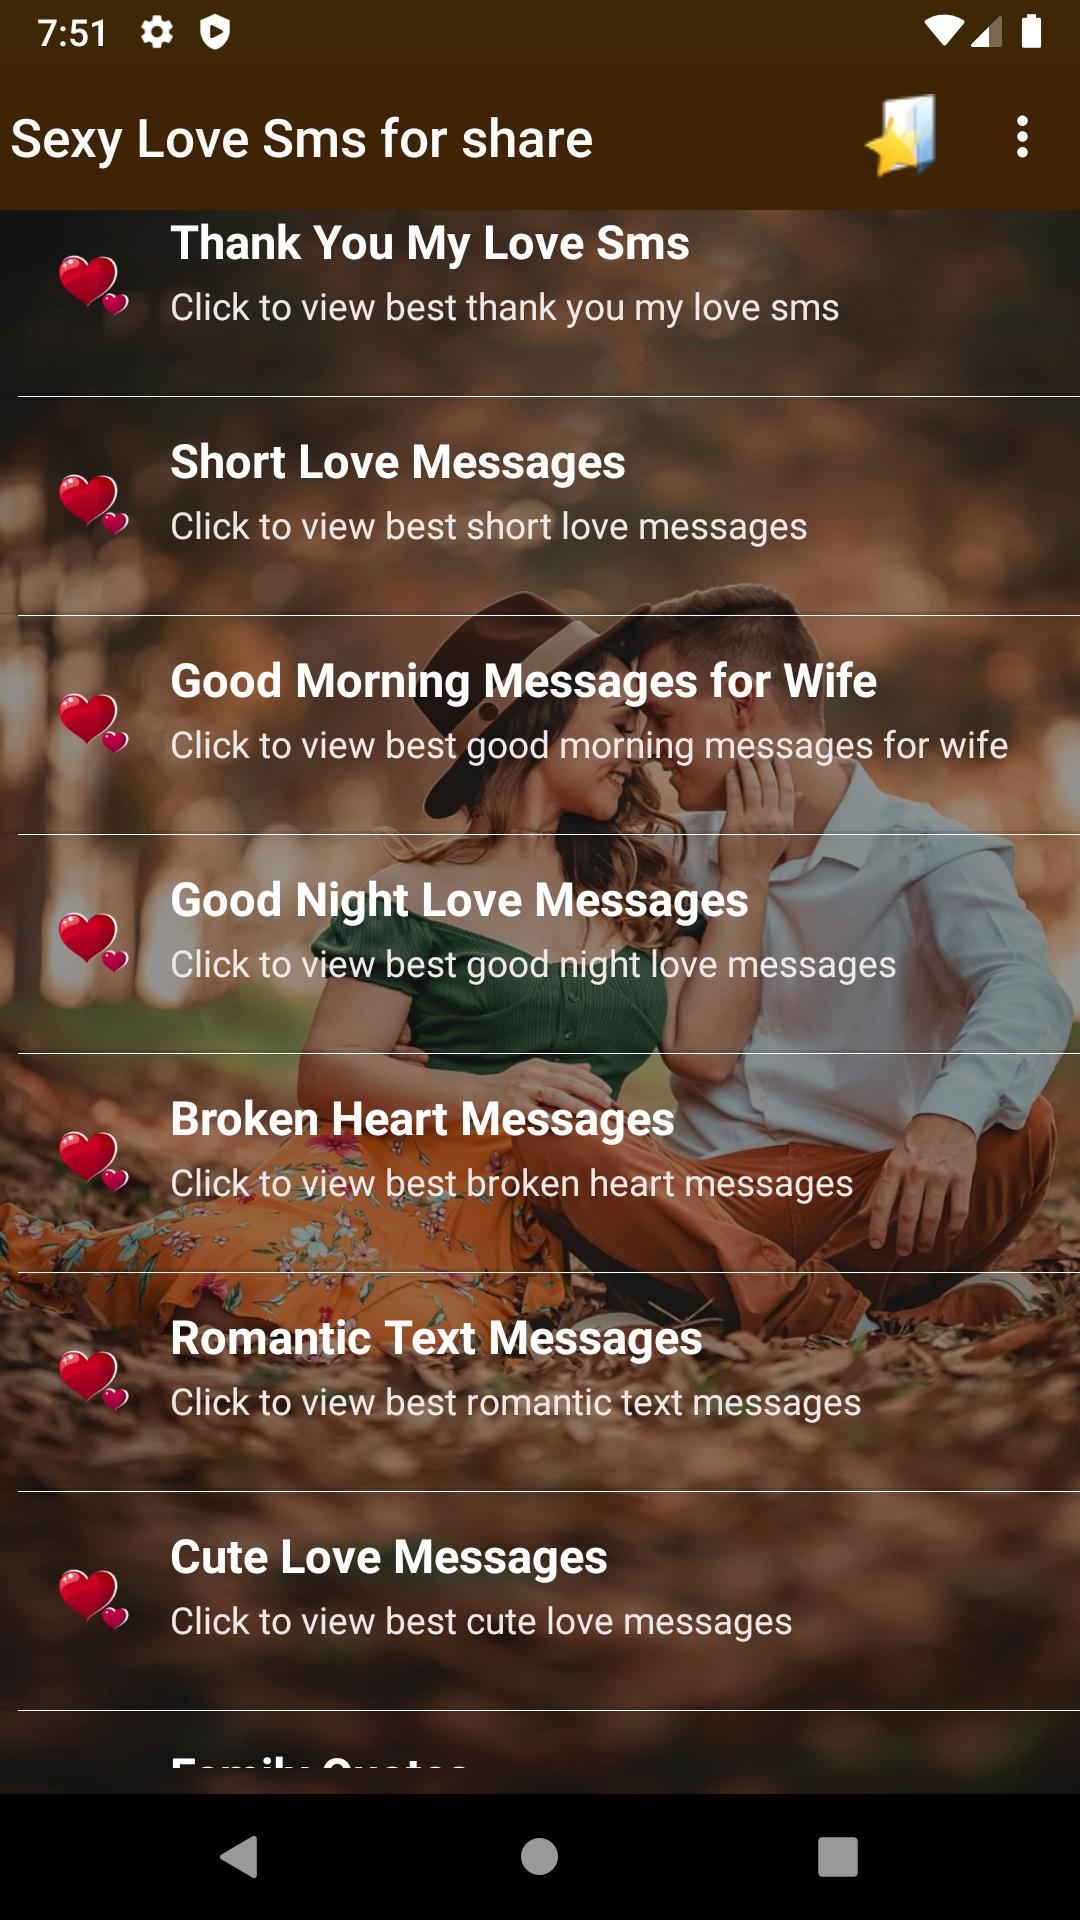 Hot sms cure